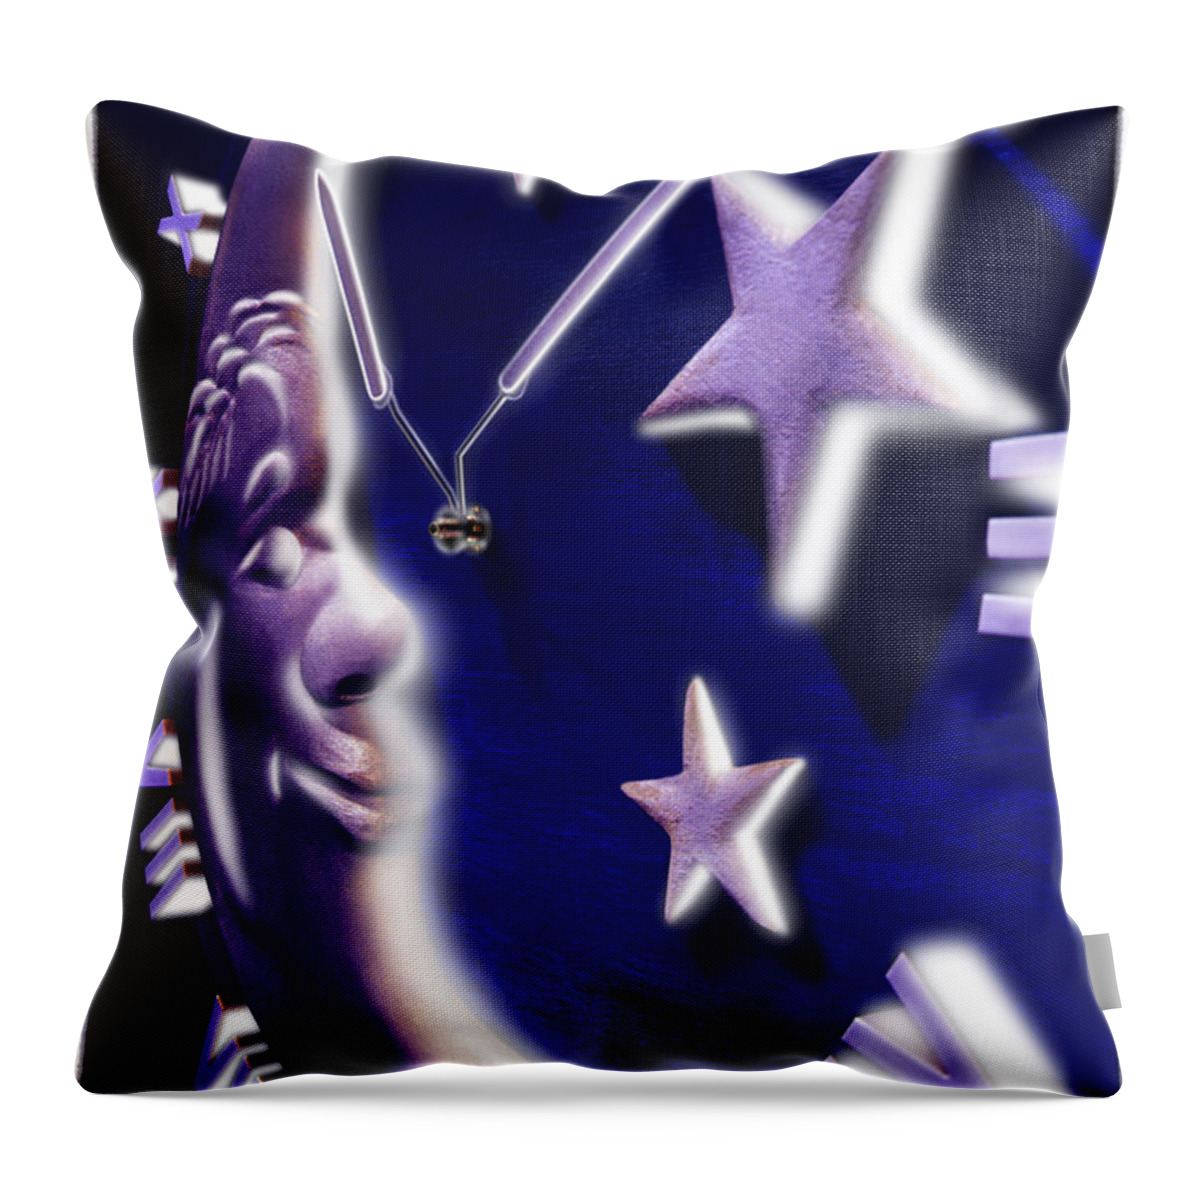 Moon Glow Throw Pillow featuring the photograph Moon Glow by Mike McGlothlen